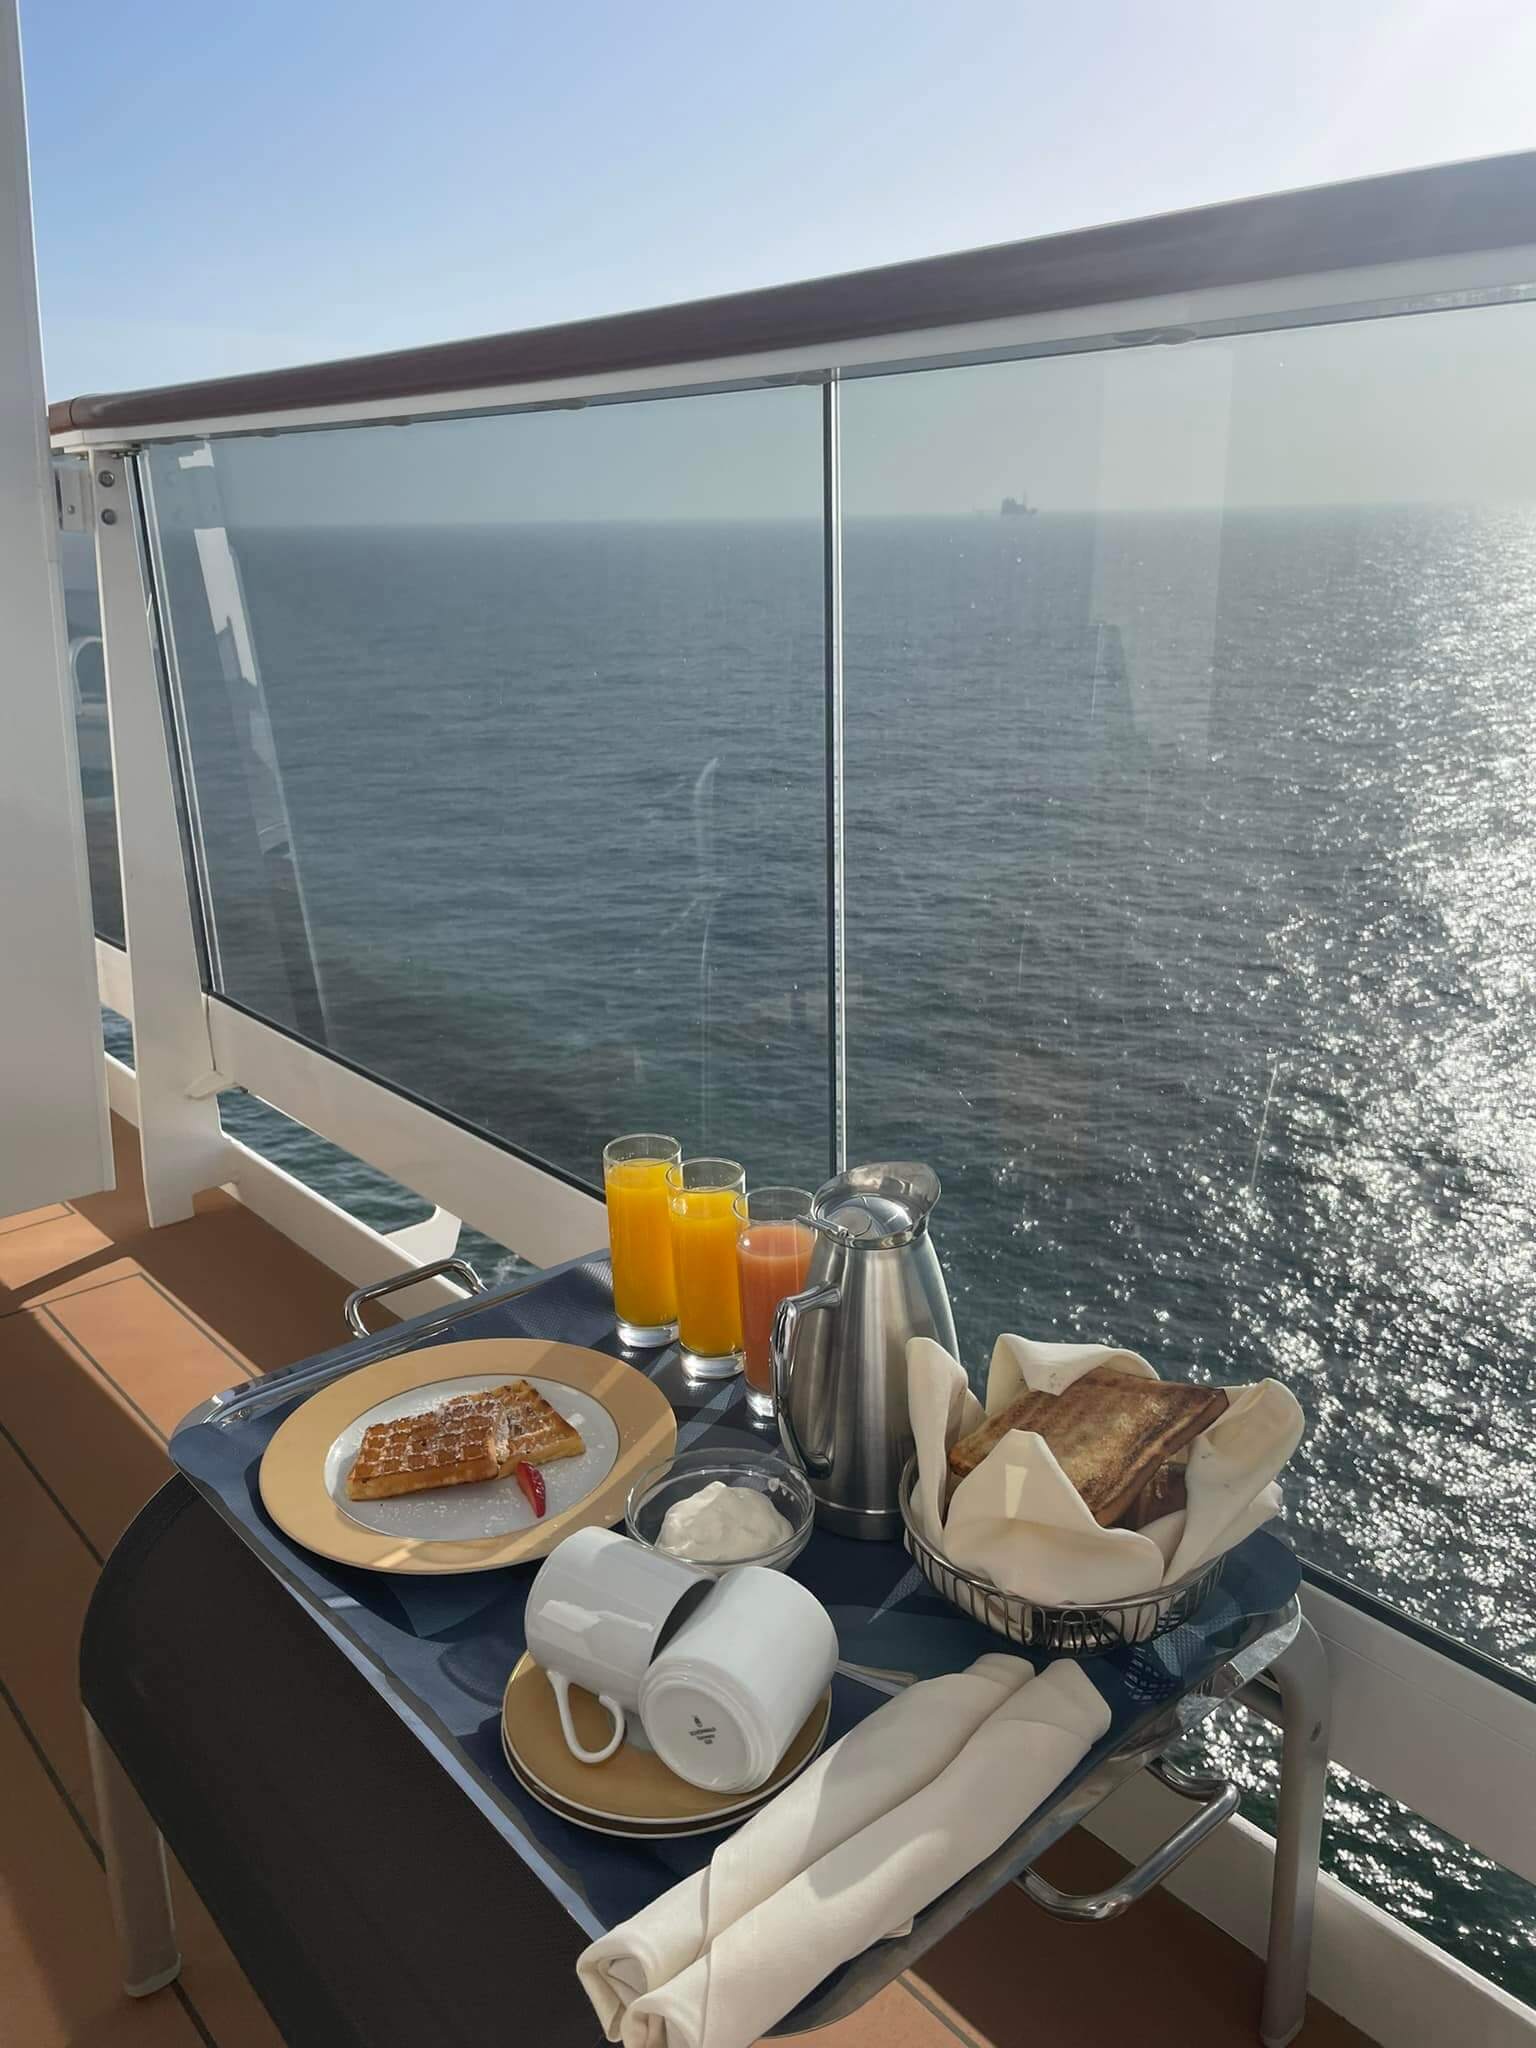 Room Service breakfast on a cruise